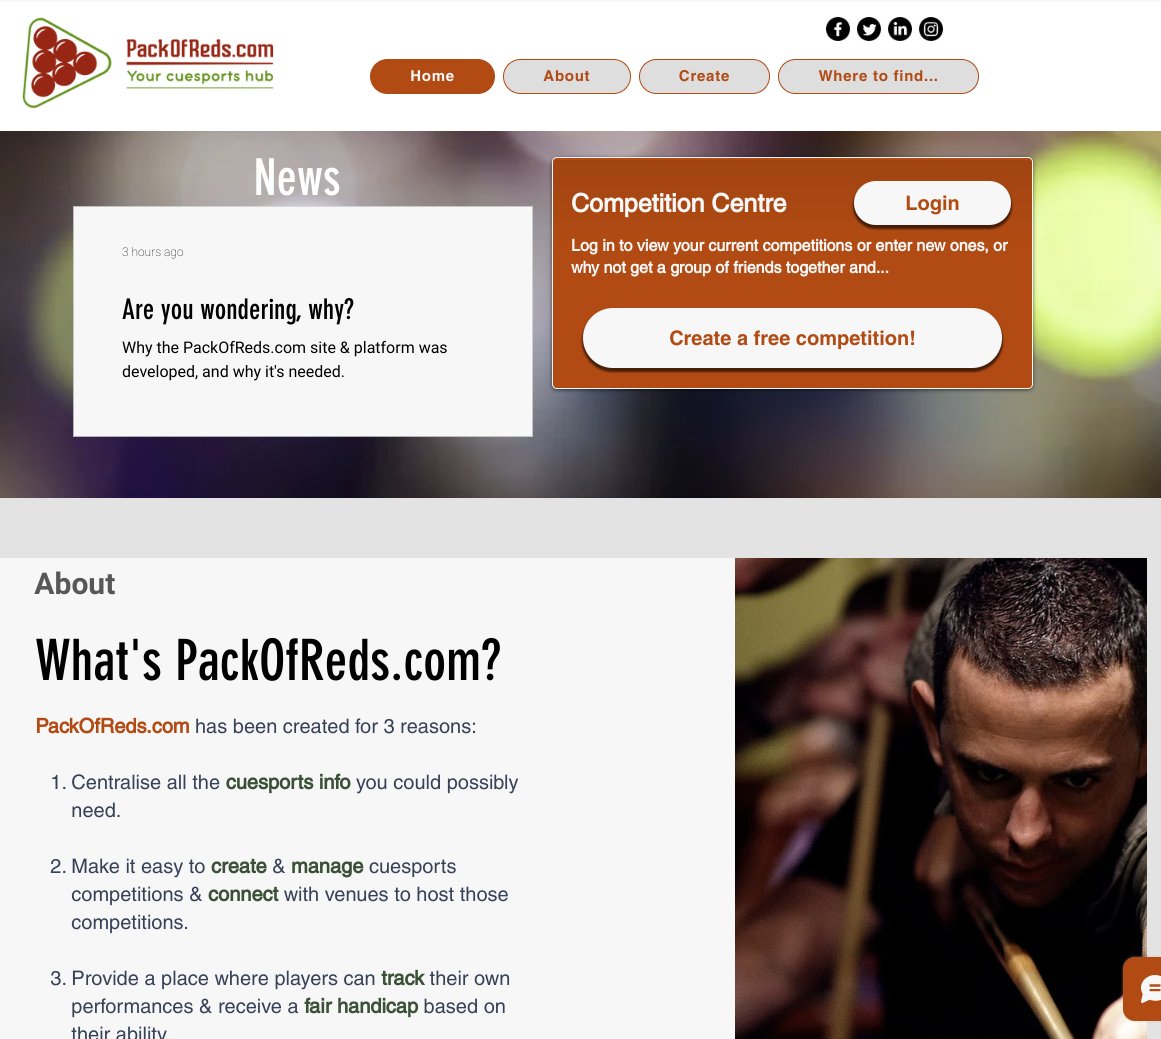 OK so I did a thing. I've created PackOfReds.com, a website & online platform for growing participation levels for #snooker & #pool by making it simple for people to create competitions among their friends & stage them at local venues. Please follow & RT @PackOfRedsCom!